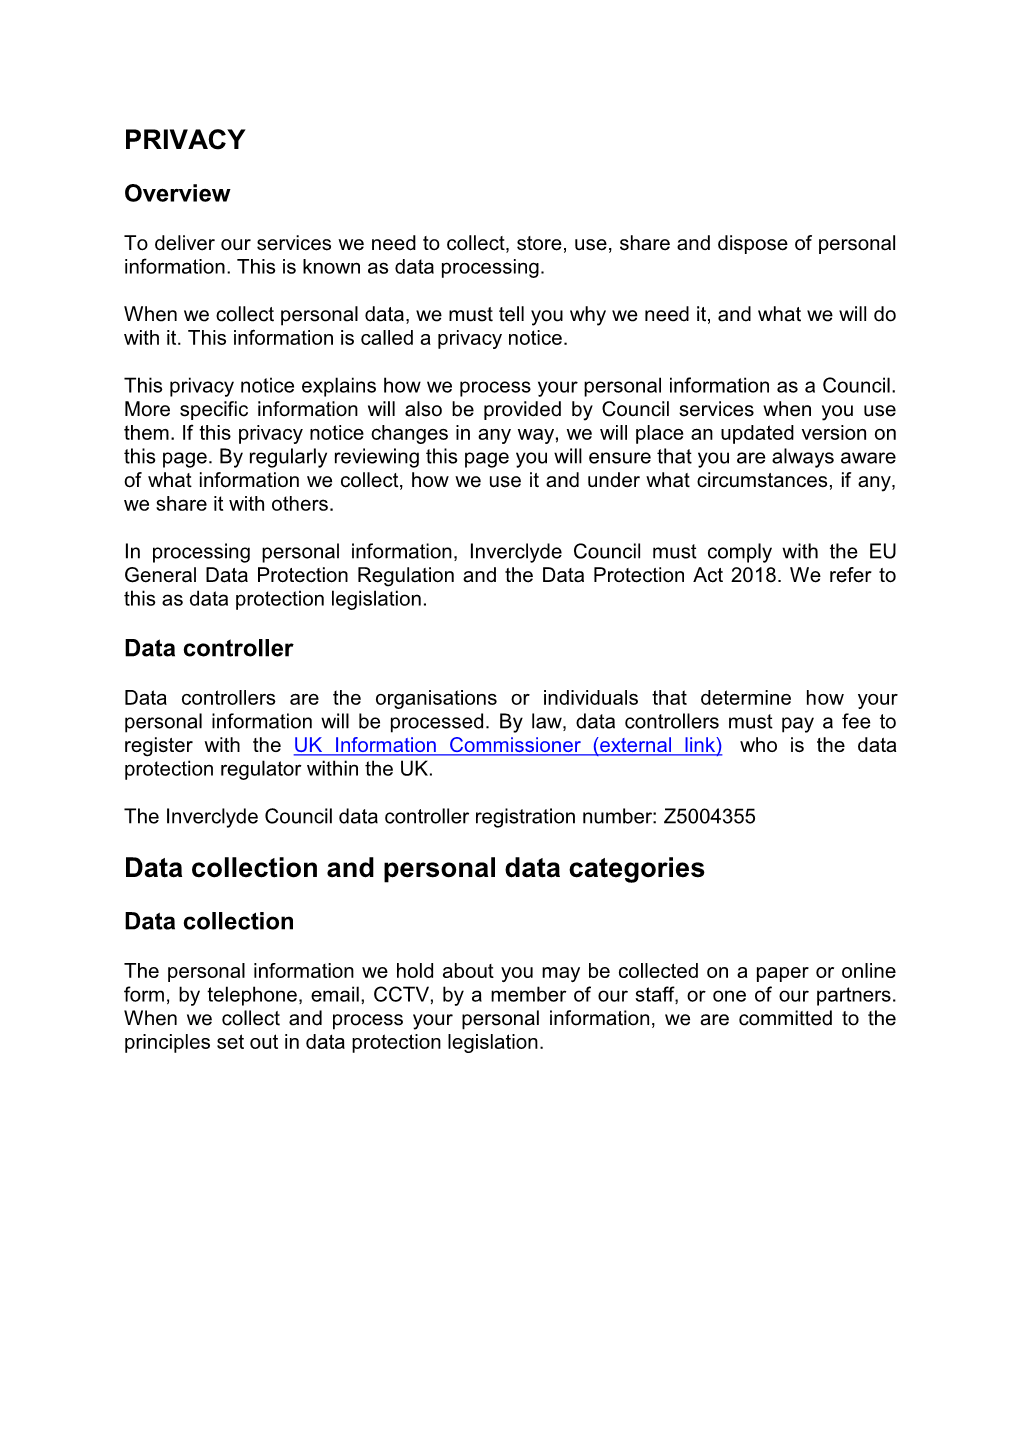 PRIVACY Data Collection and Personal Data